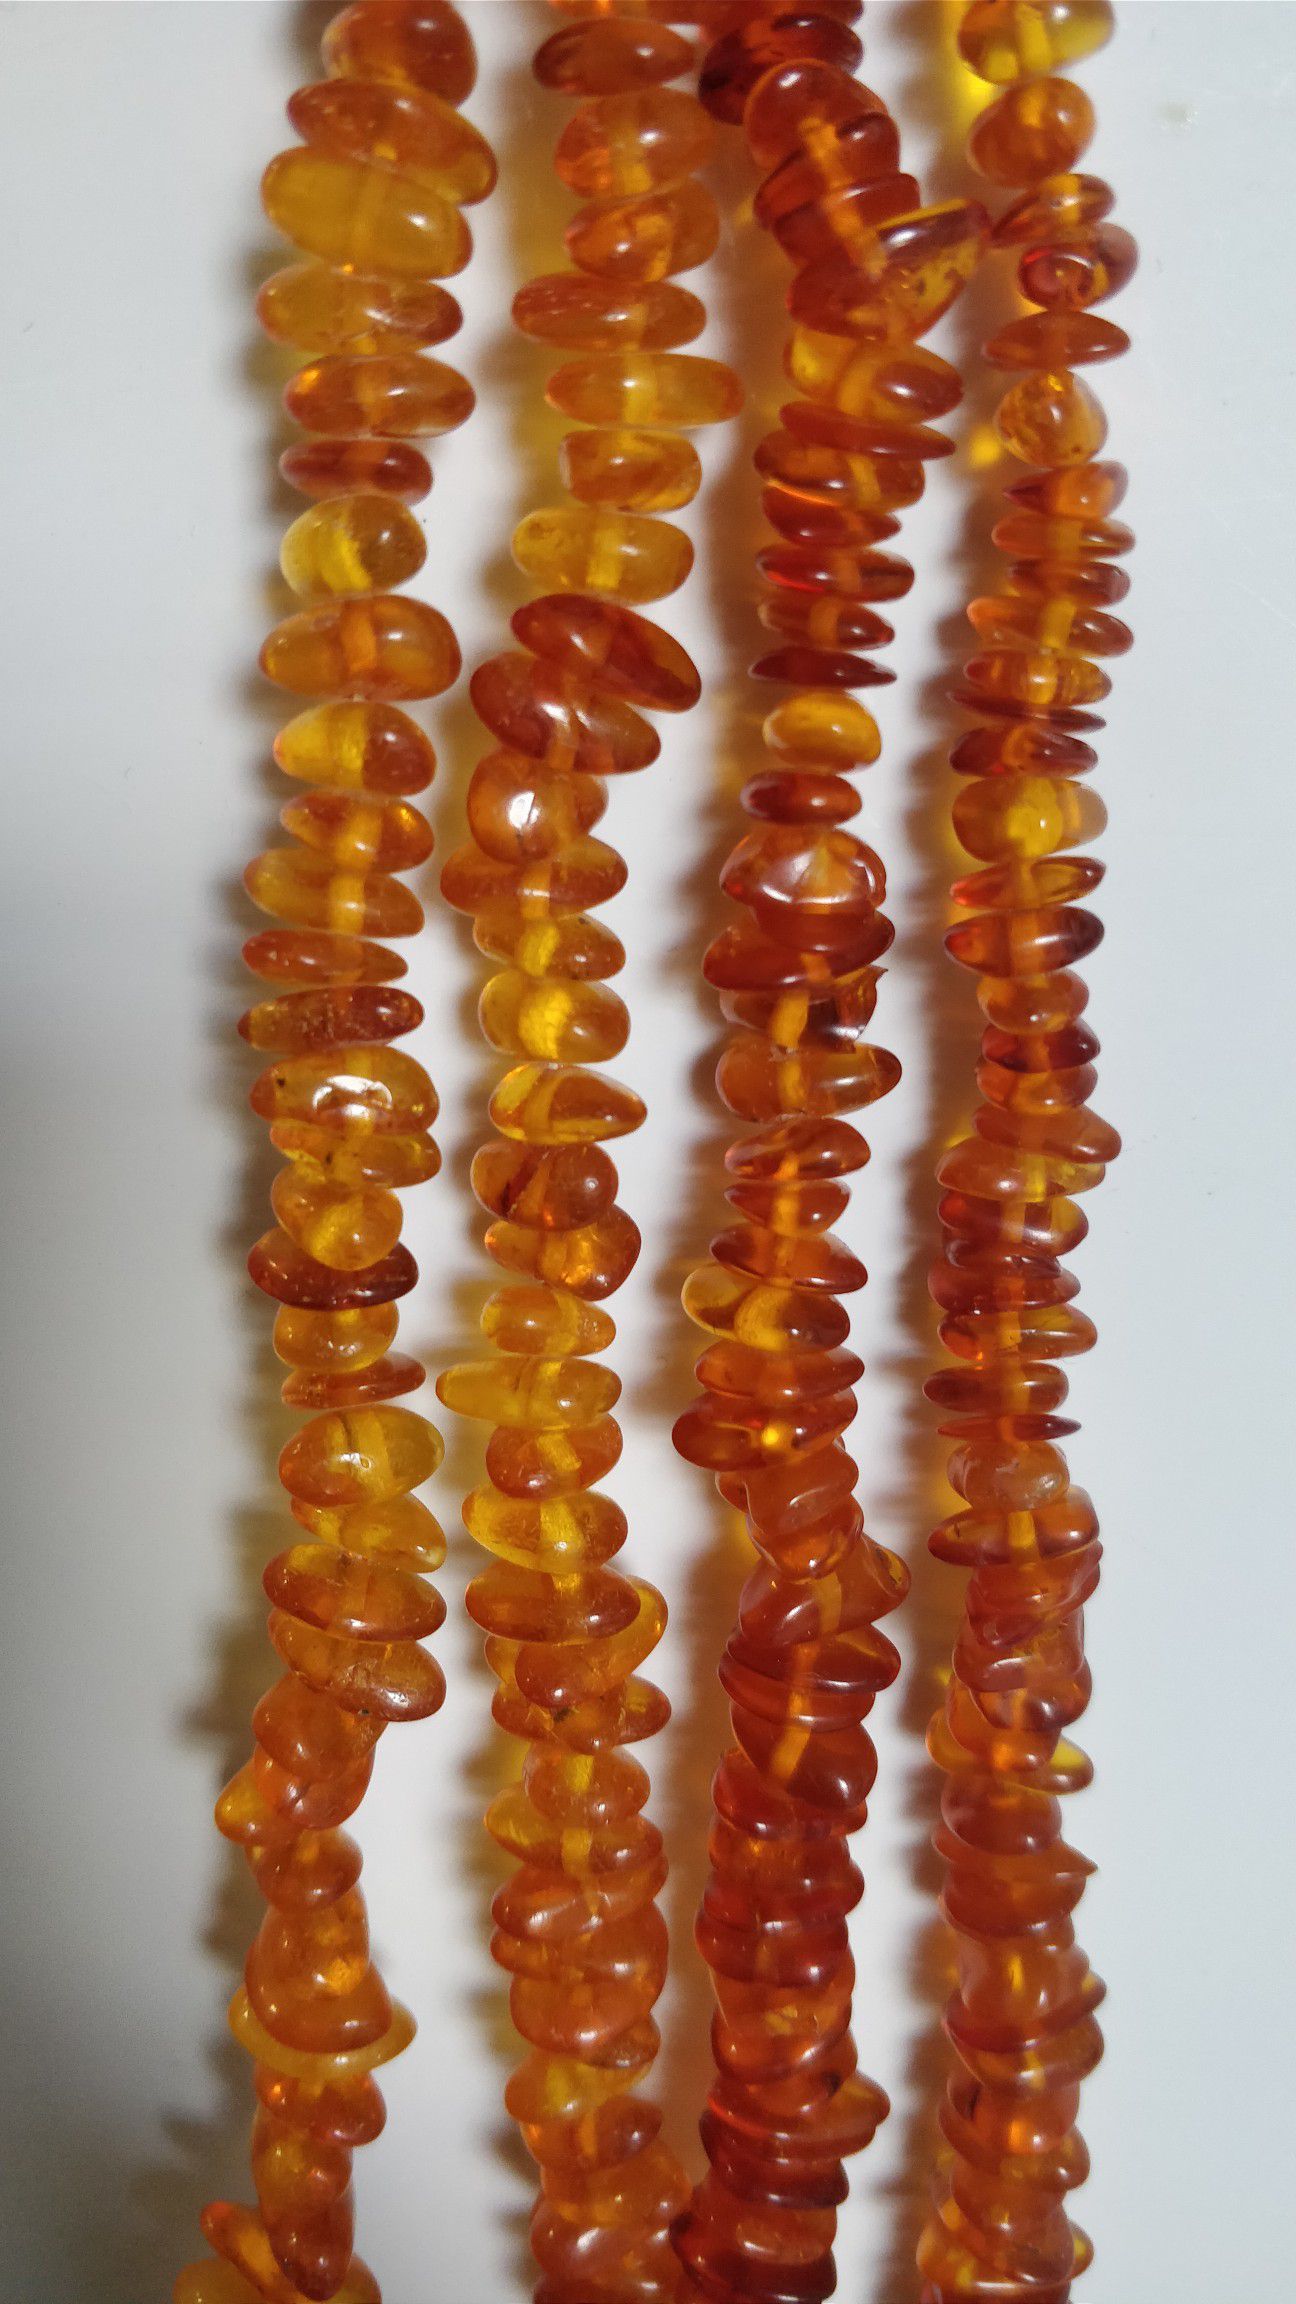 Amber necklace.